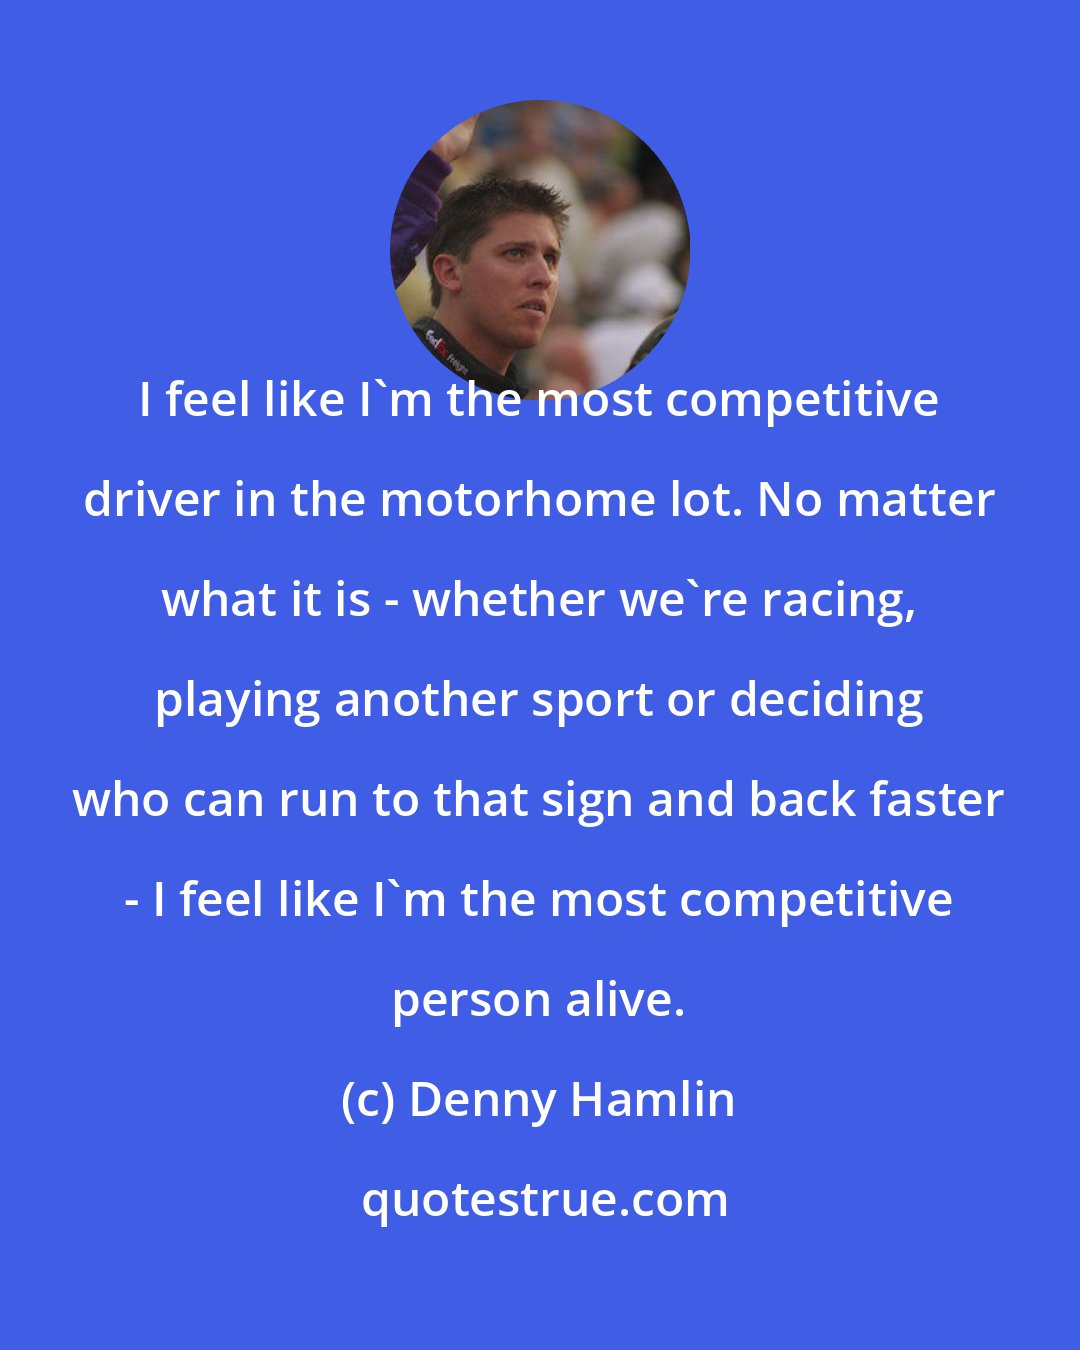 Denny Hamlin: I feel like I'm the most competitive driver in the motorhome lot. No matter what it is - whether we're racing, playing another sport or deciding who can run to that sign and back faster - I feel like I'm the most competitive person alive.